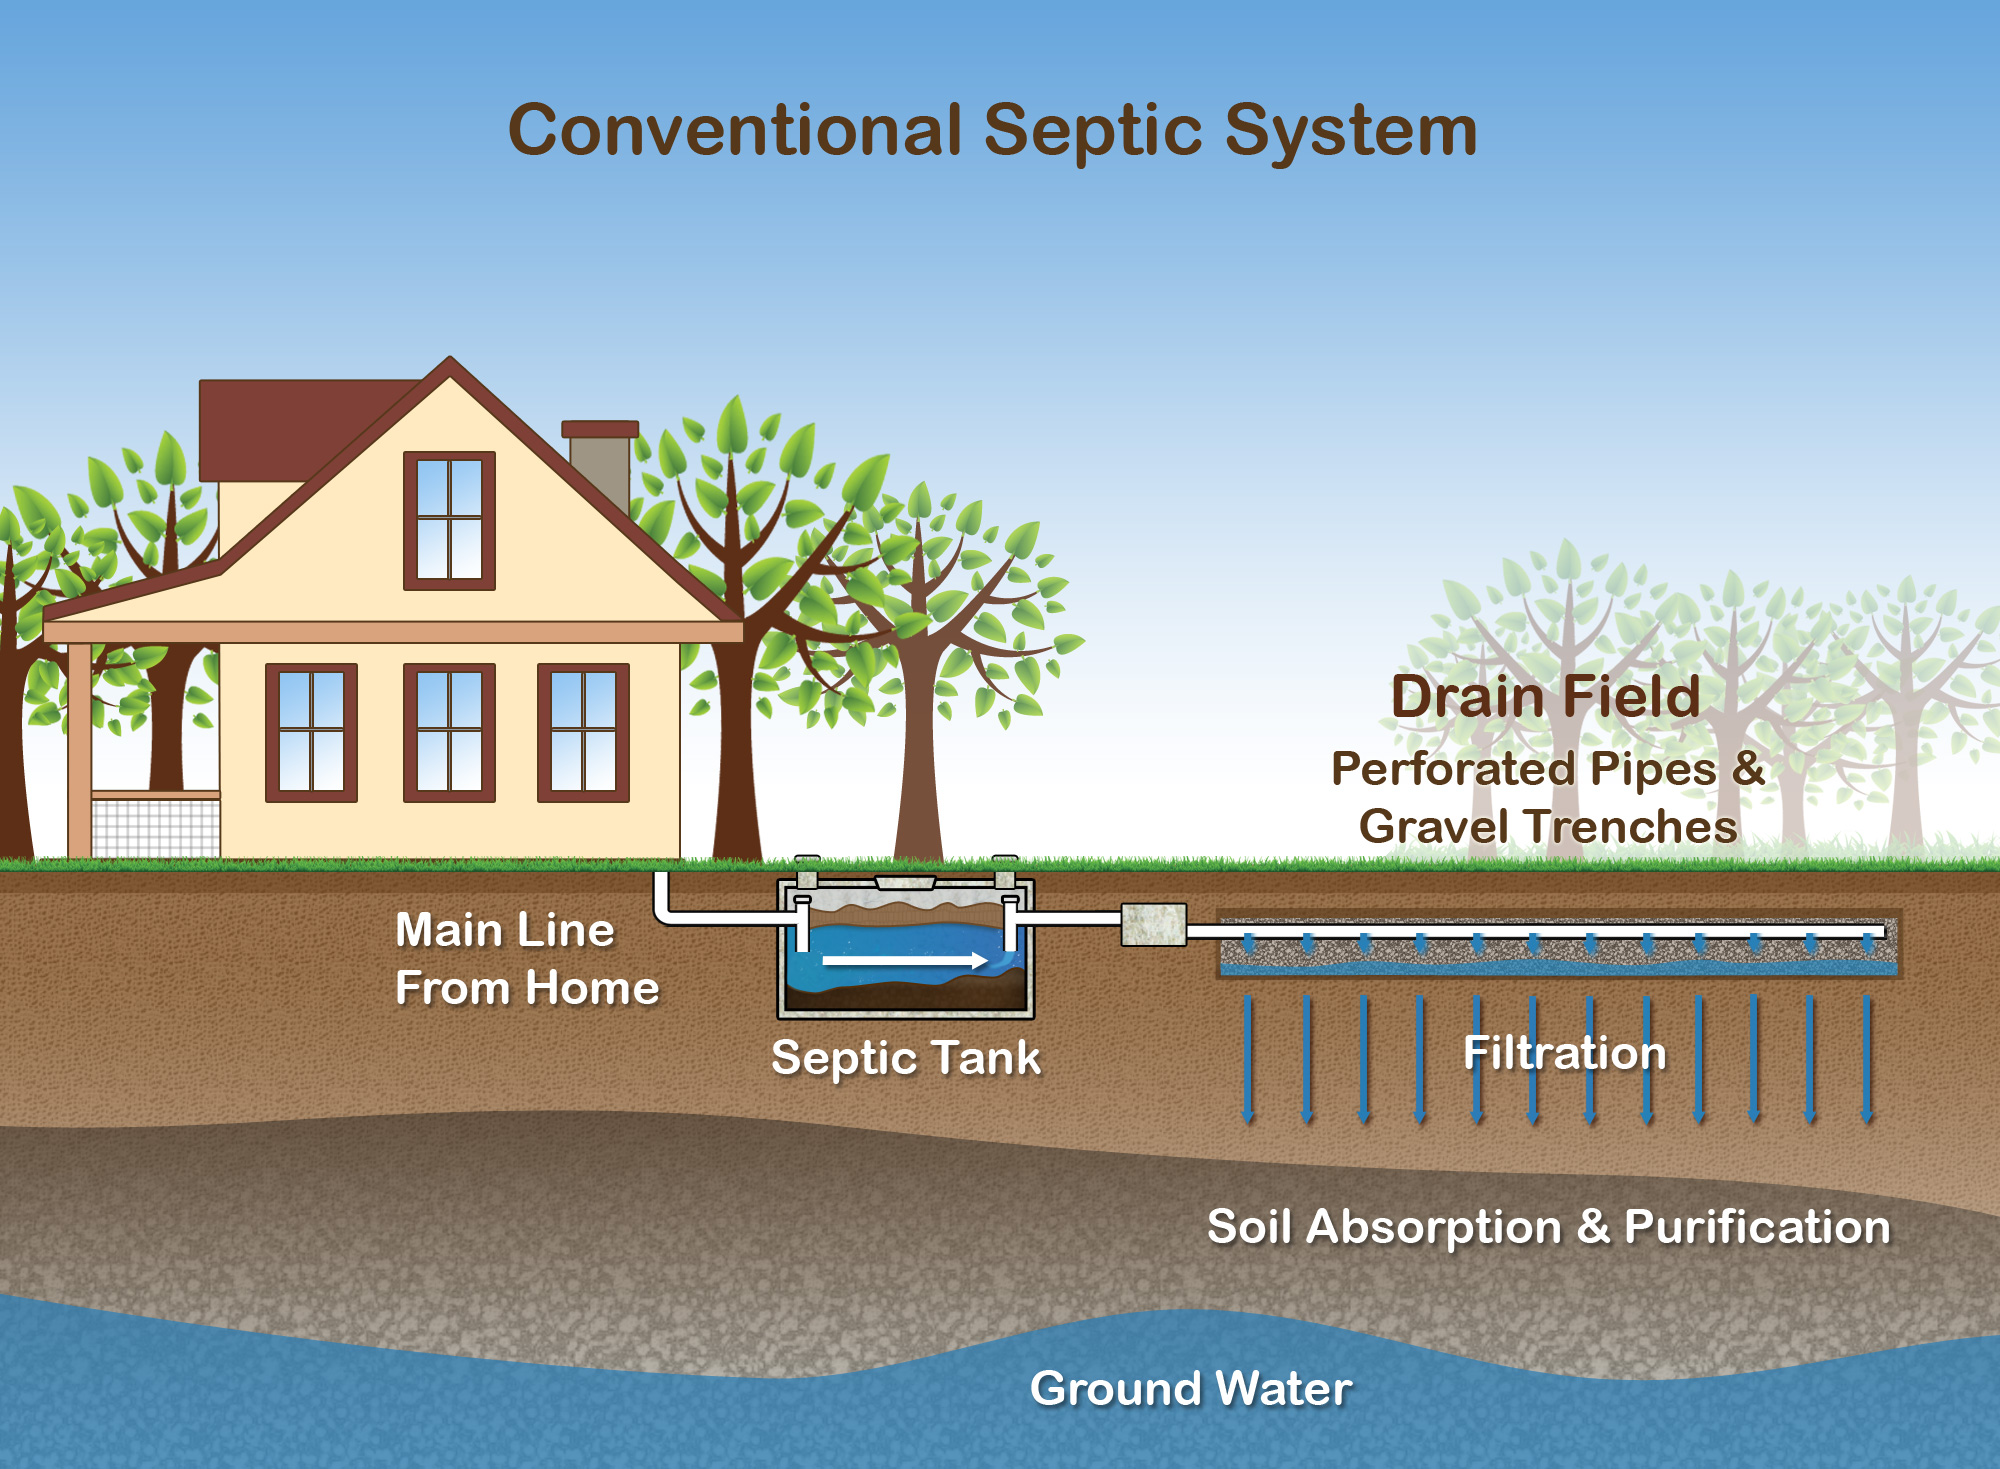 What is a septic tank?